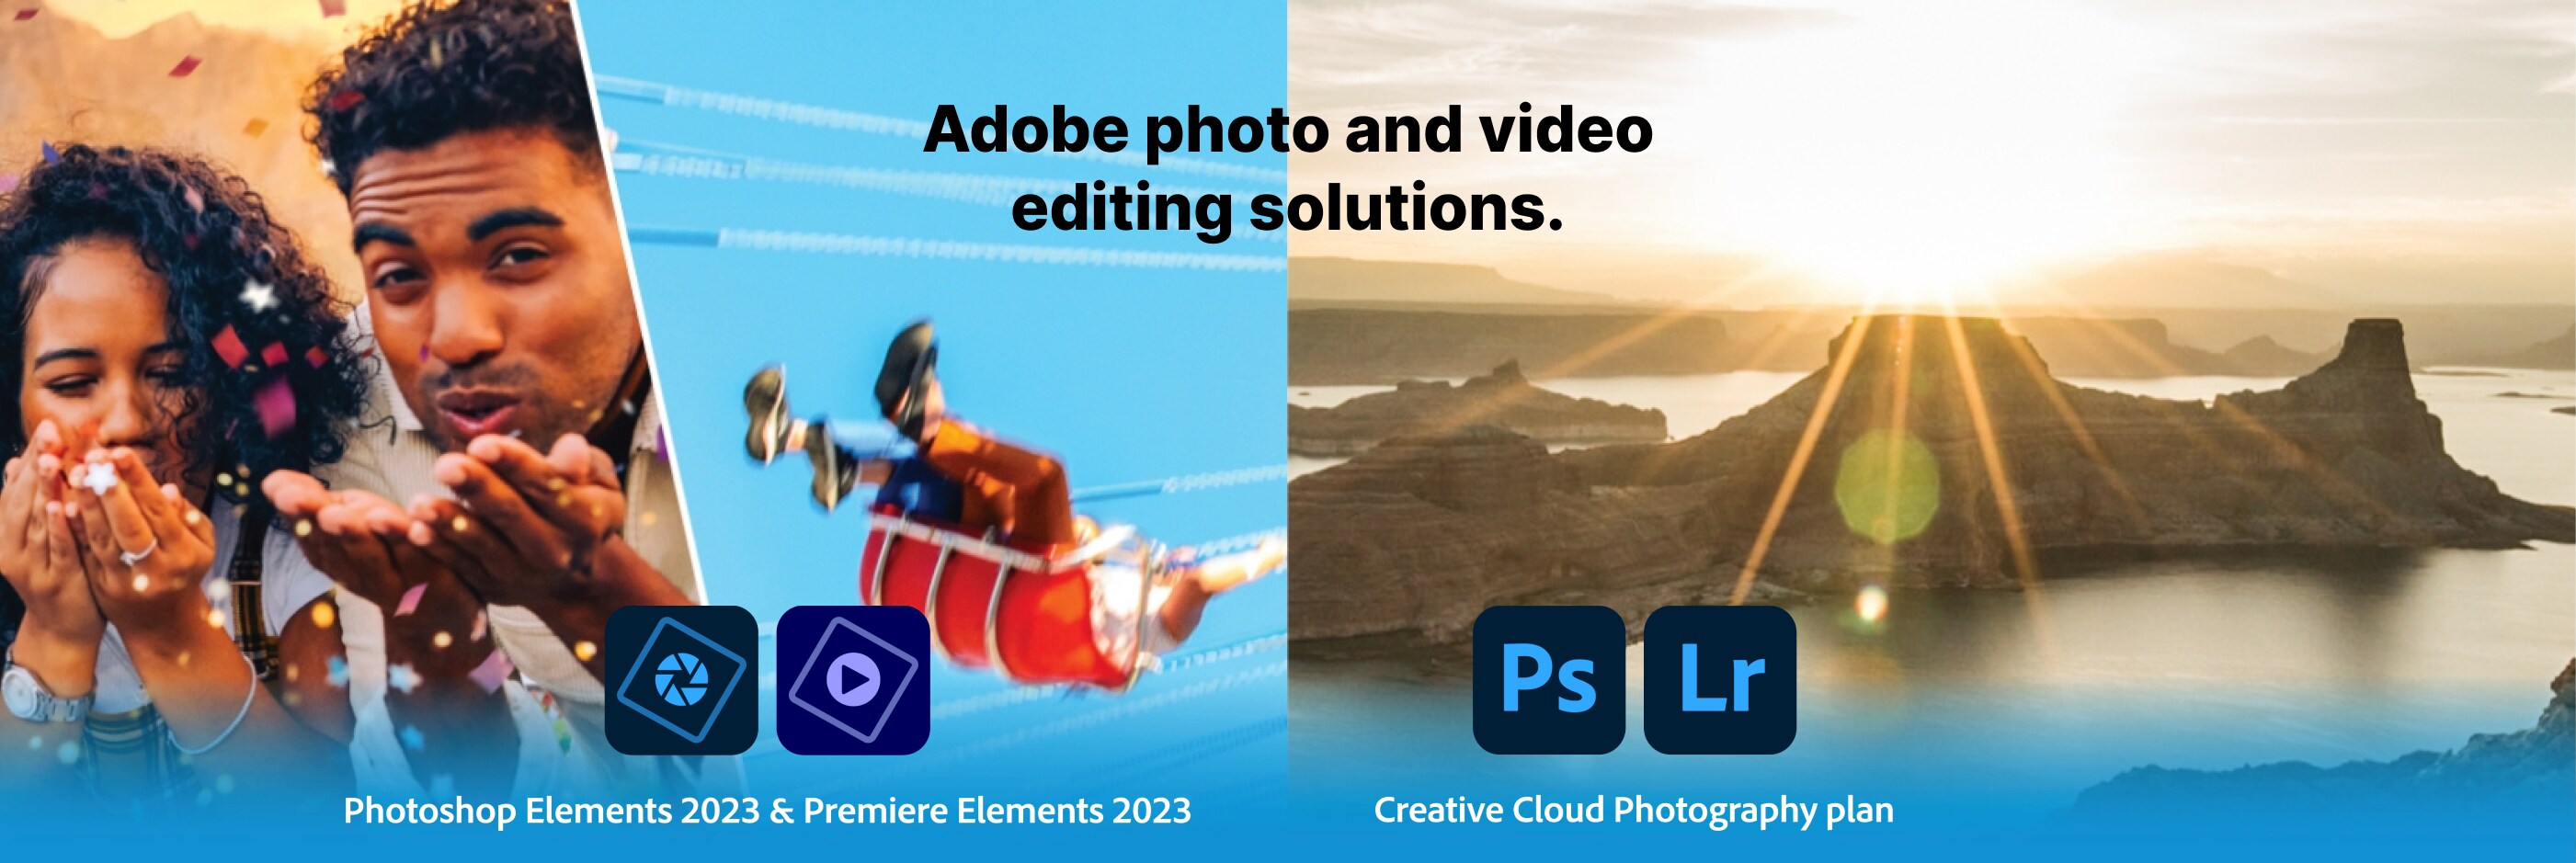 Adobe photo and video editing solutions.